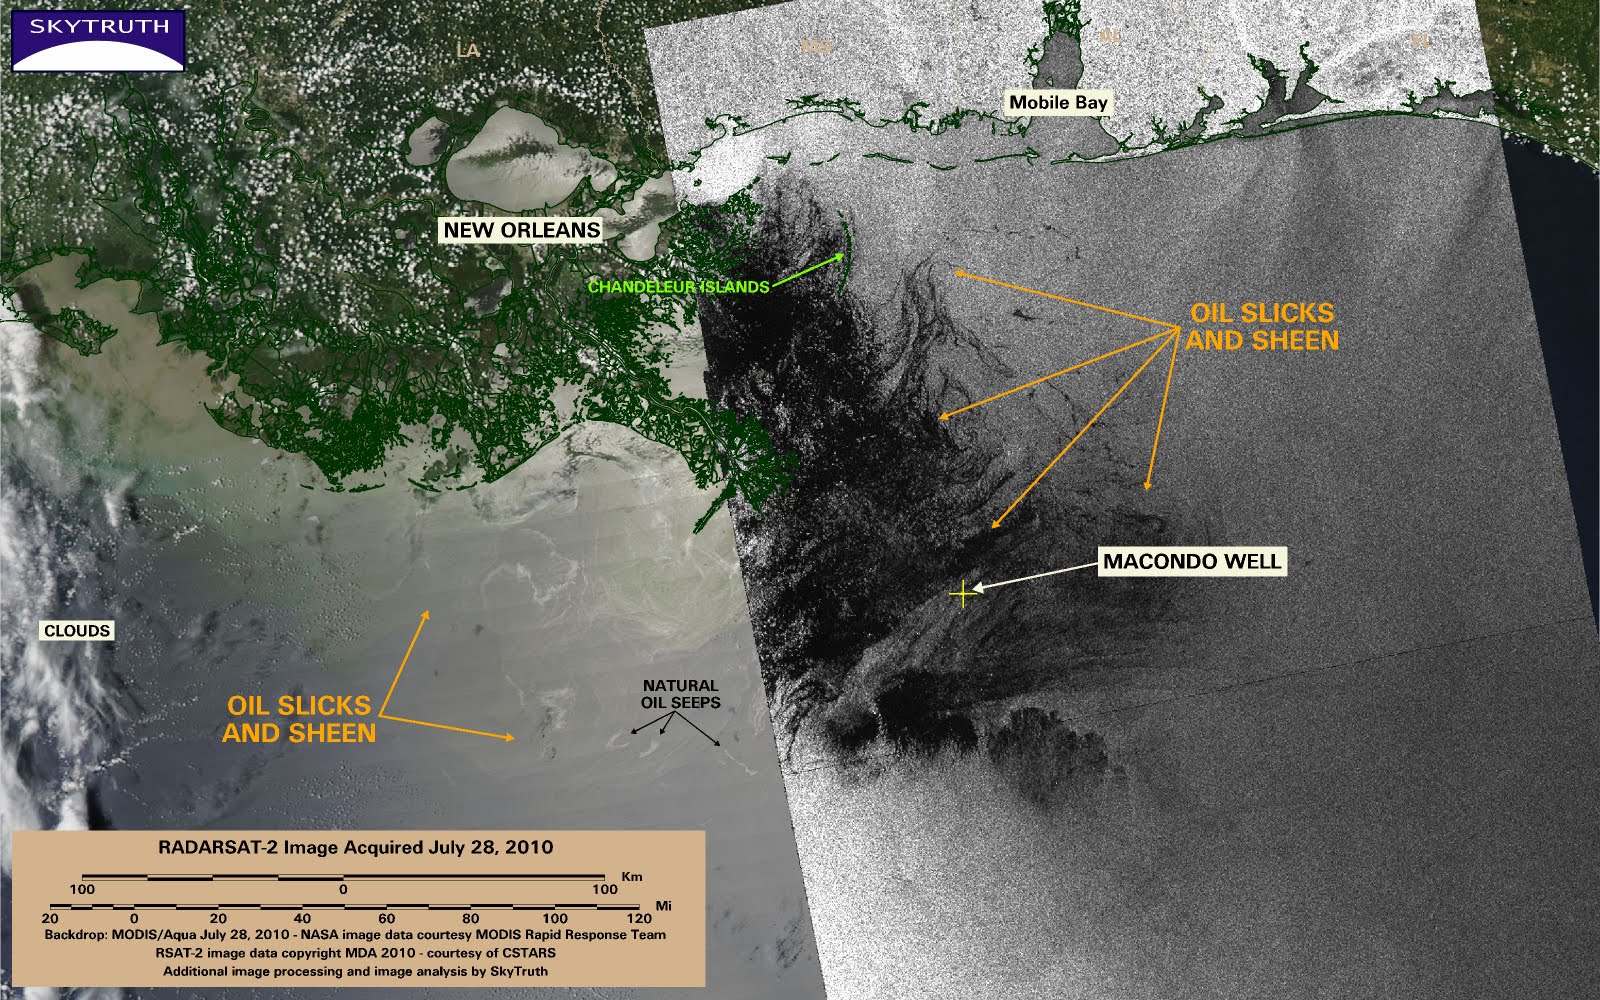 BP Gulf Oil Spill Satellite Image July 28th 2010 With Infrared Analysis